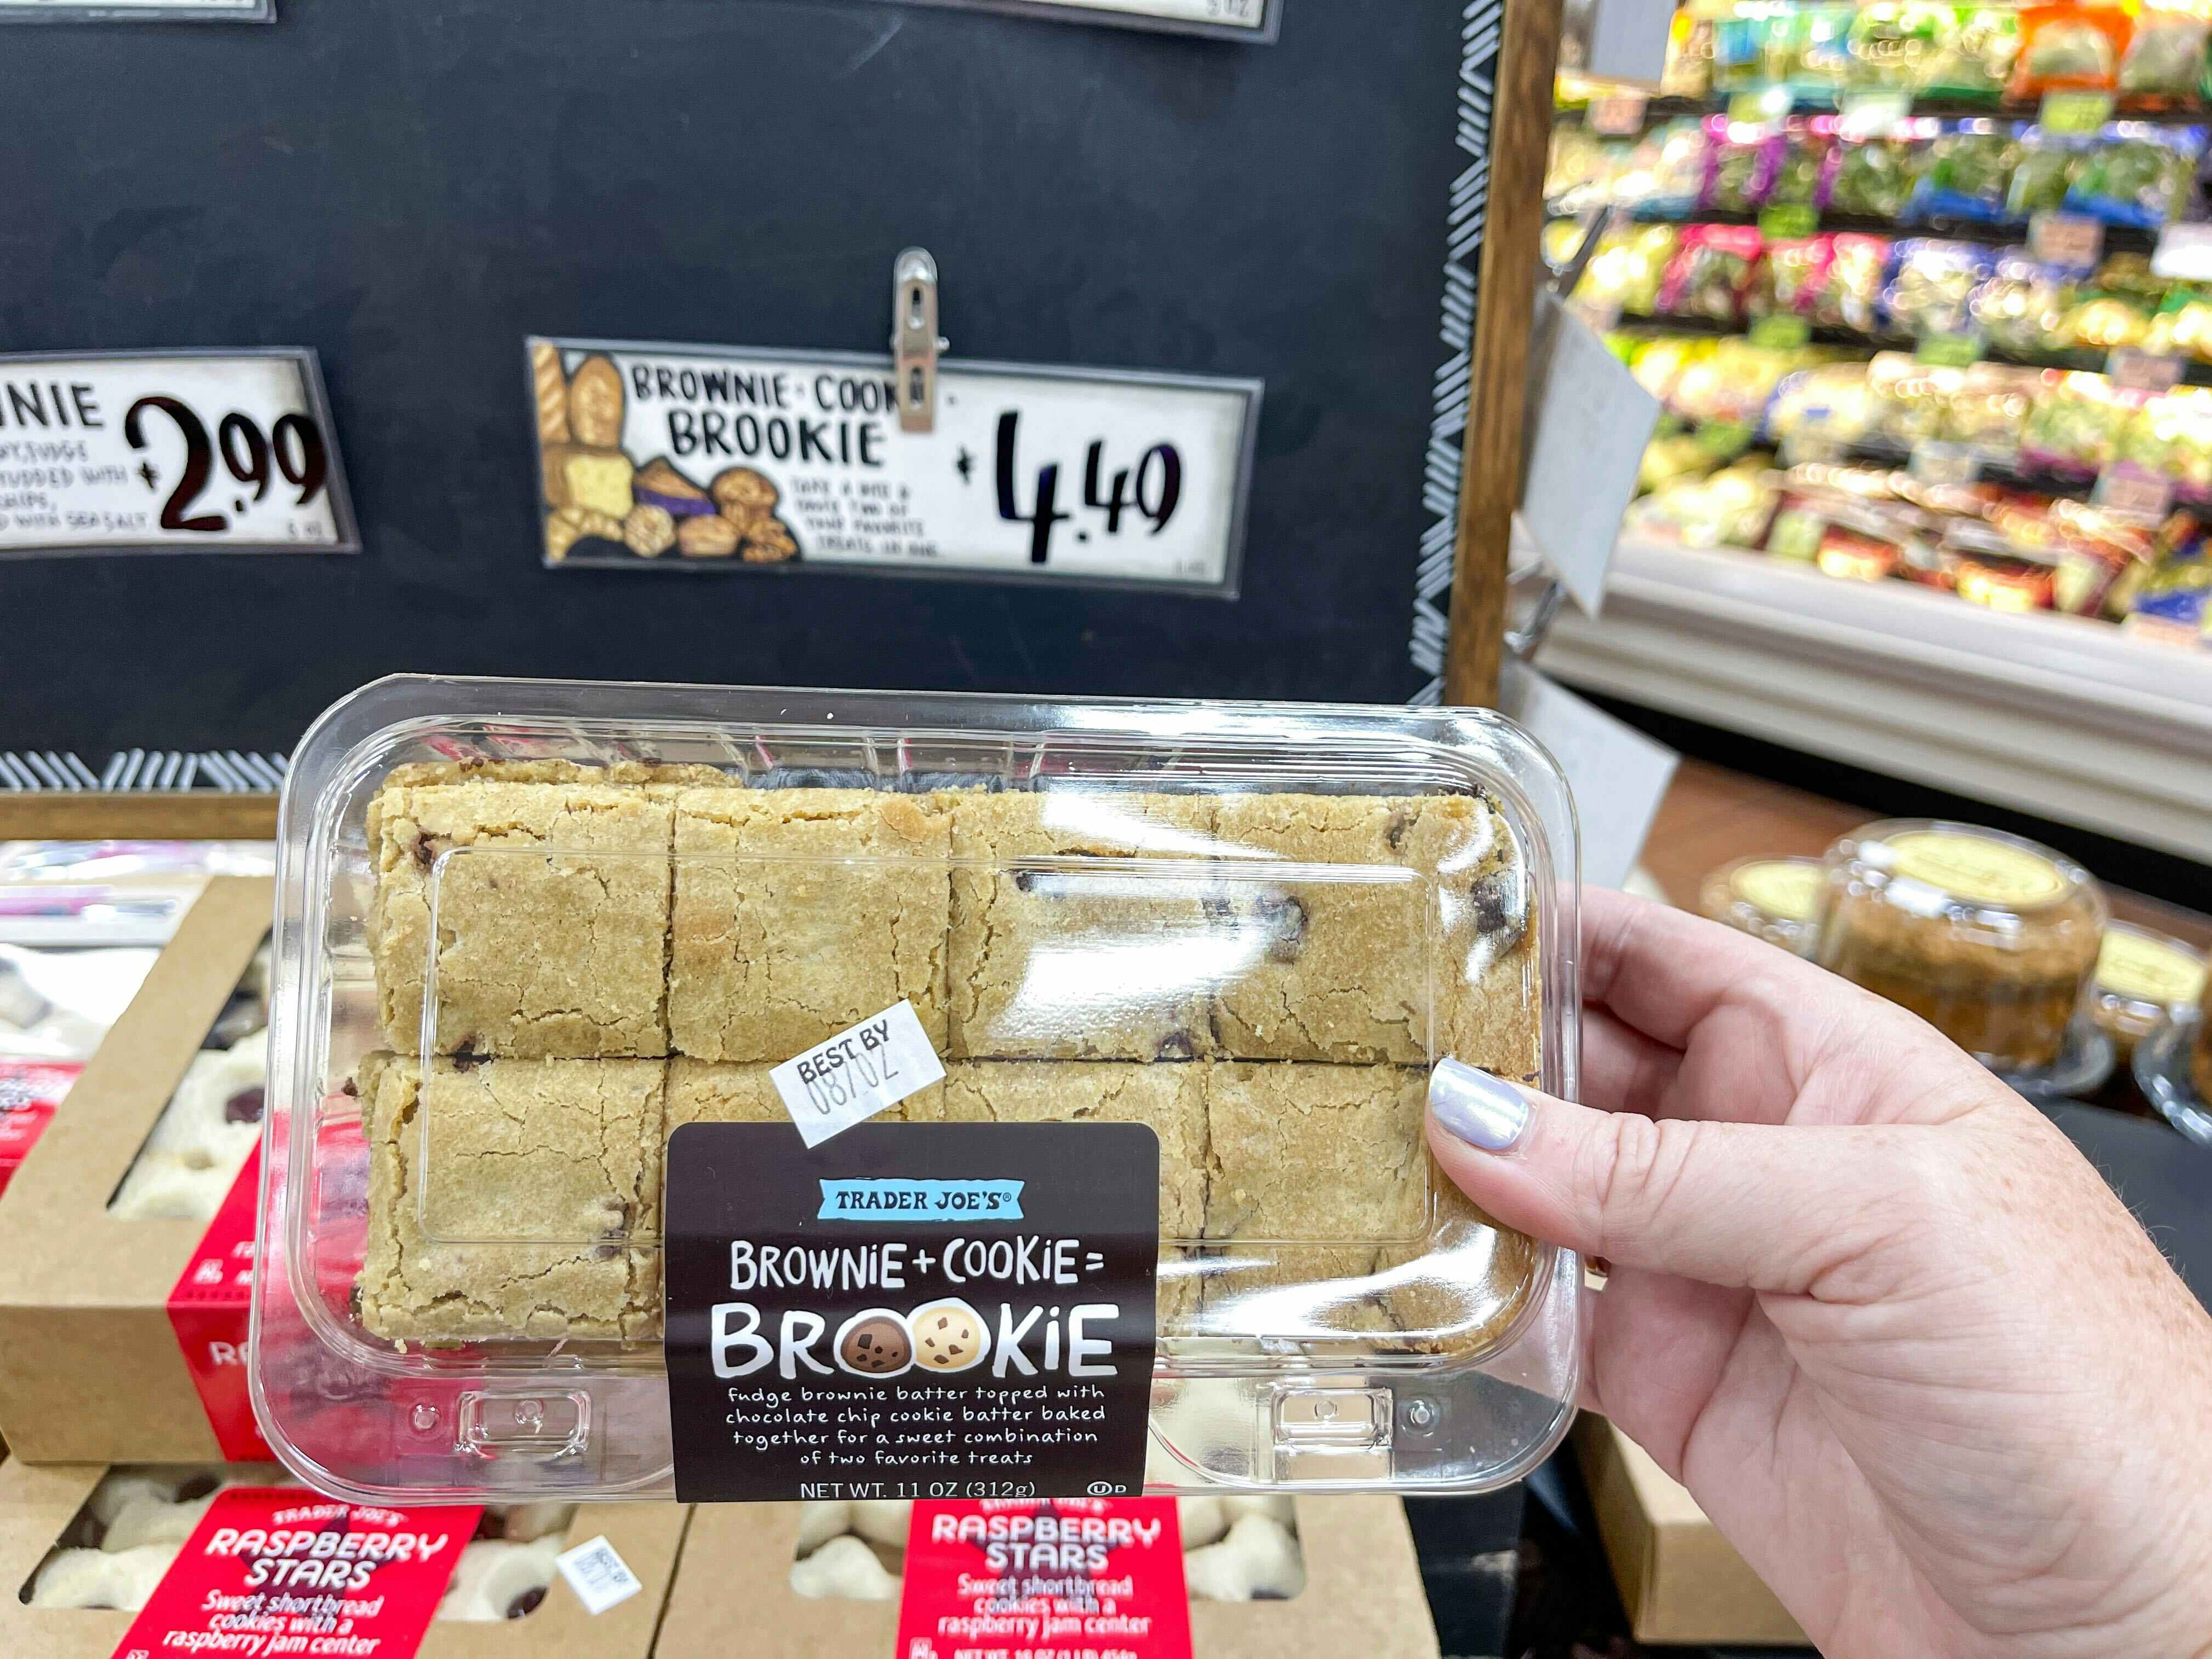 A person's hand holding a container of Trader Joe's Brookie in front of a table inside Trader Joe's.